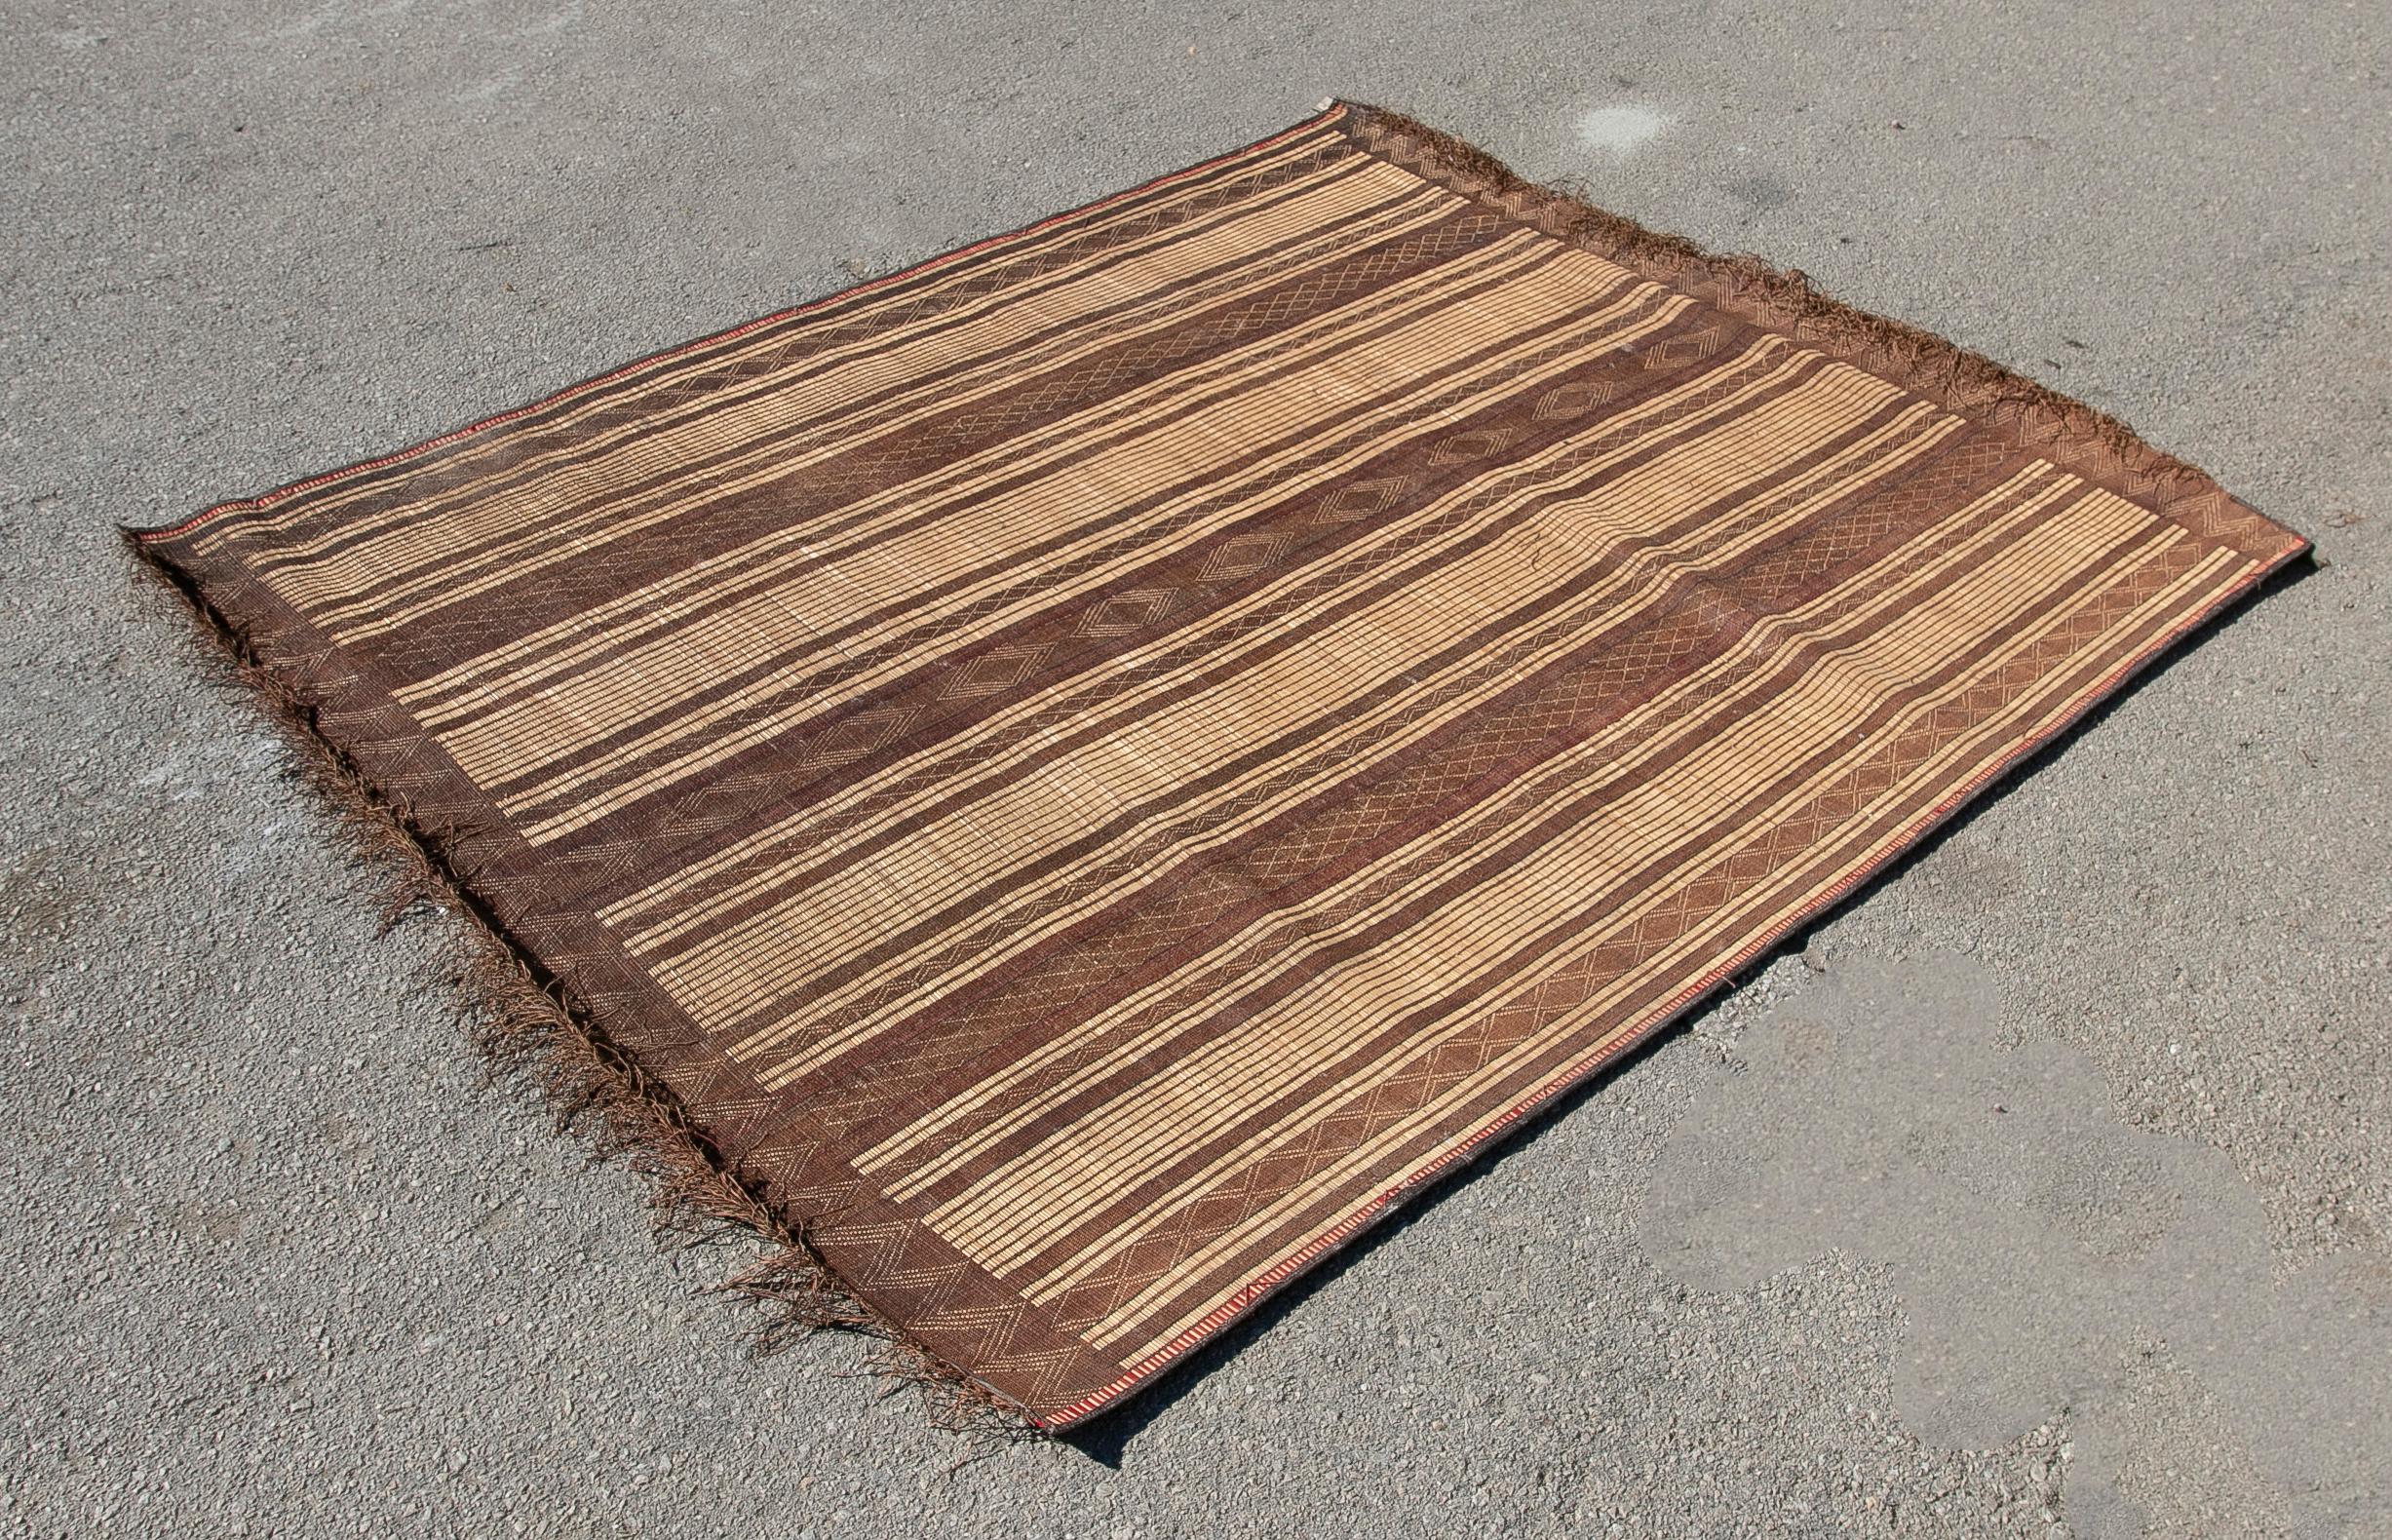 Moroccan Tuareg leather mats are made of dwarf palm tree fibers and hand woven with leather stripes, this are great to use indoor or outdoor, beautiful brown earth-tone colors. This vintage midcentury carpets are made in the desert of Morocco near